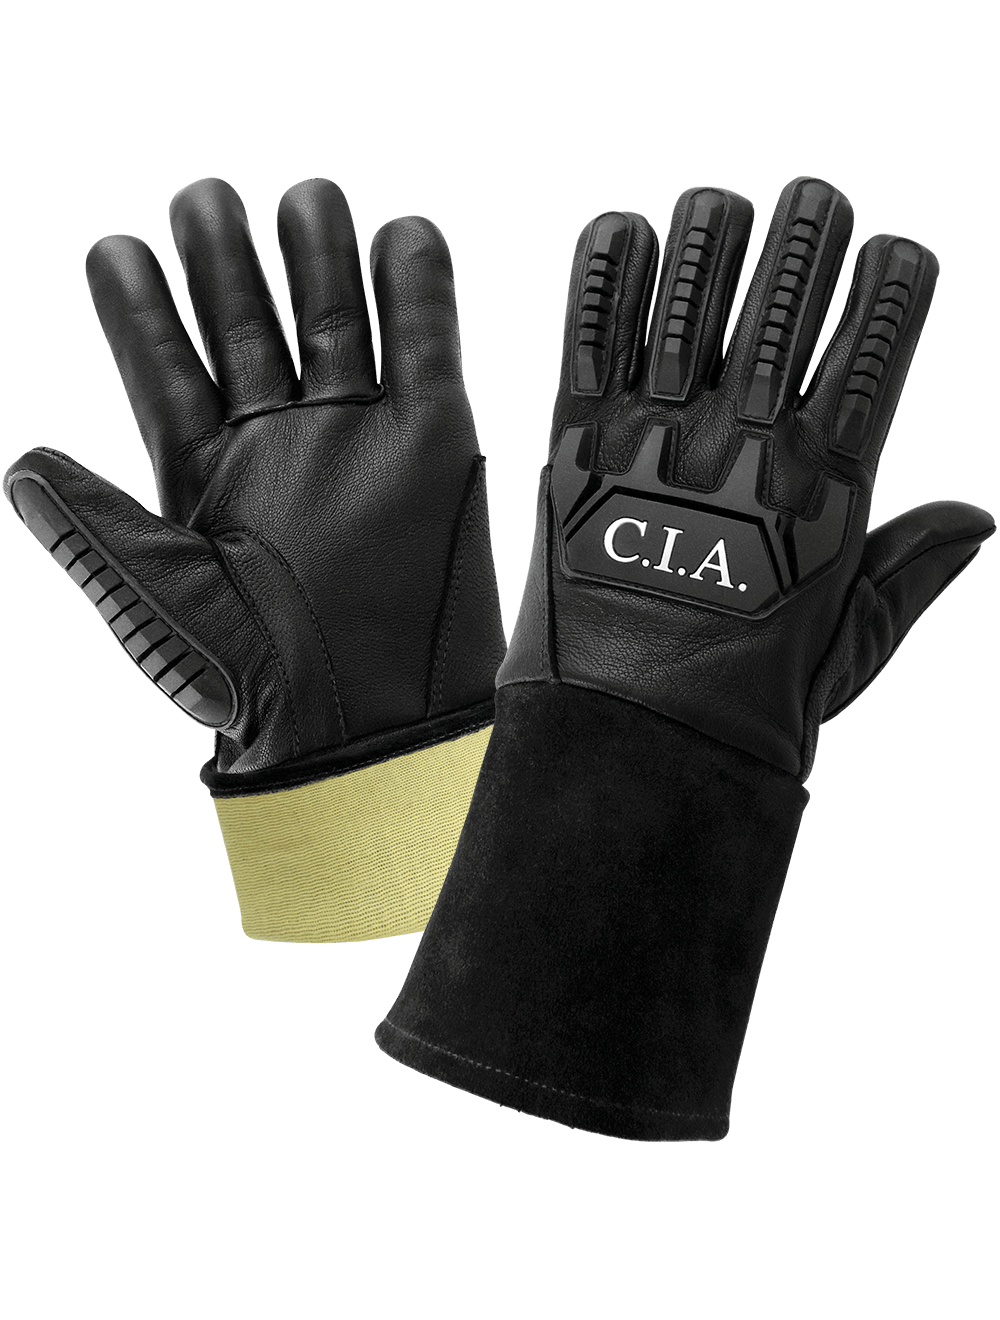 Cut, Abrasion, Puncture, Impact, and Flame Resistant Grain Goatskin Mig/Tig Welding Gloves - CIA200MTG